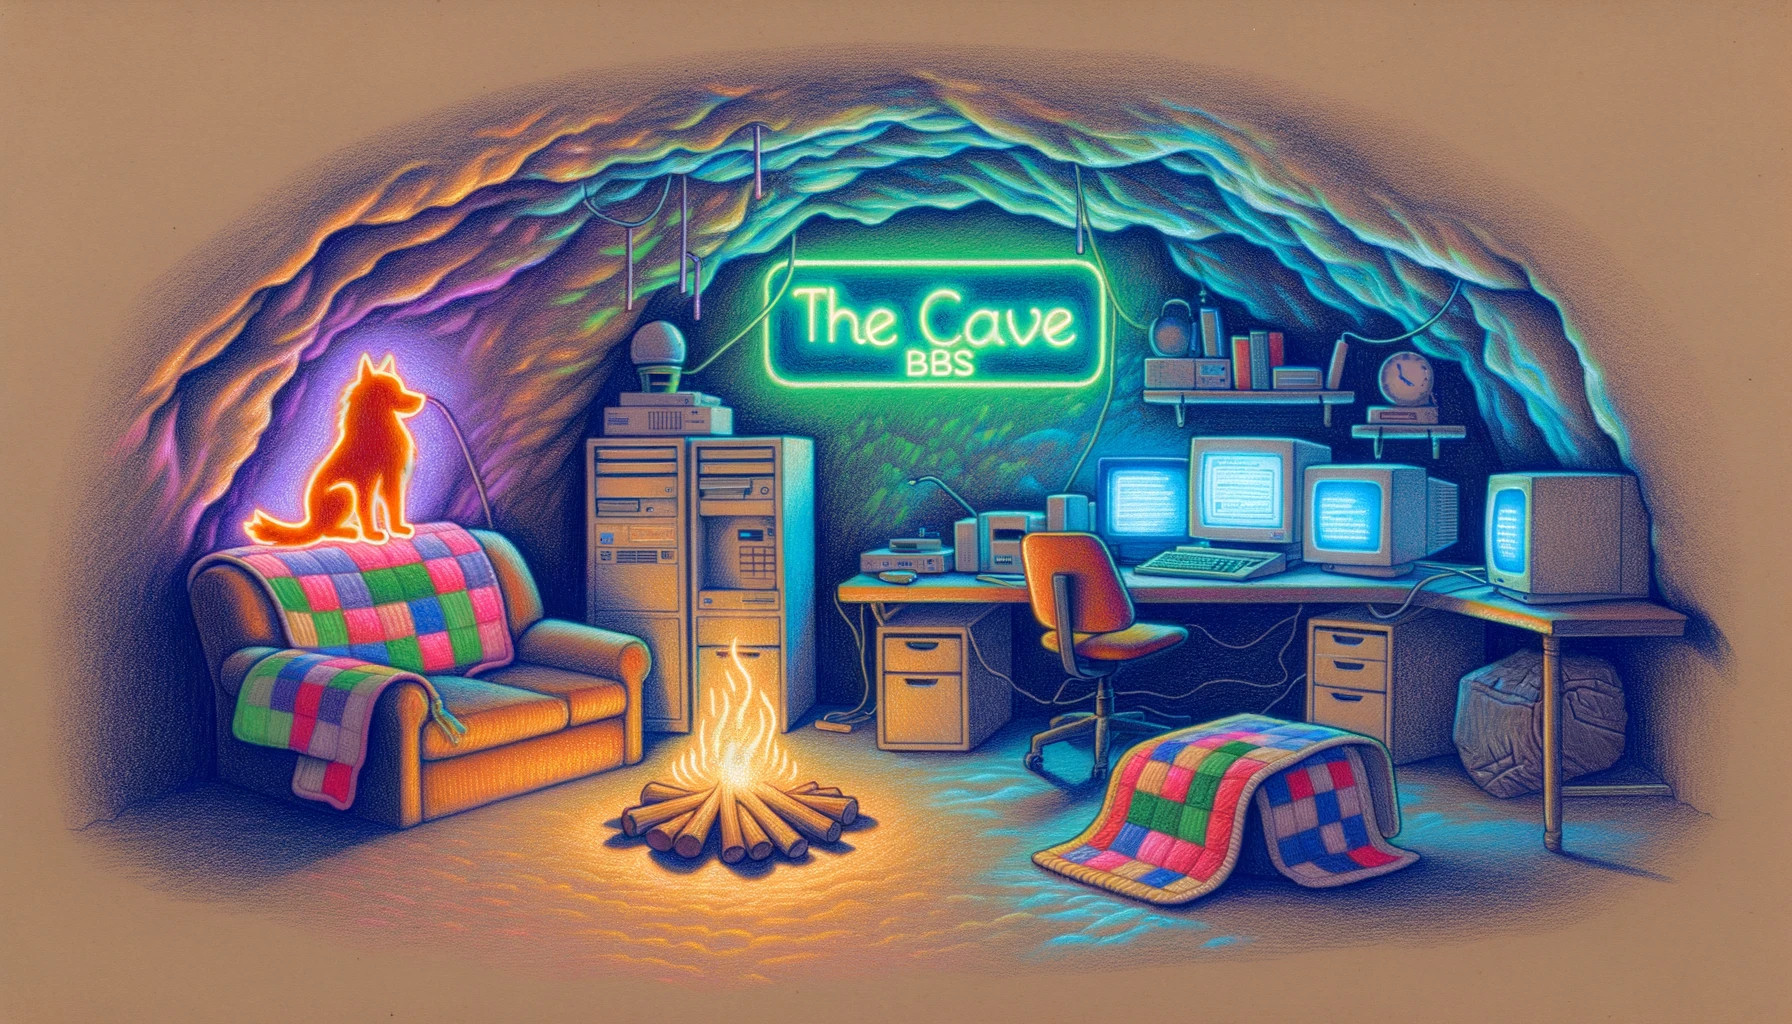 An AI-generated illustration of a promotional image for The Cave BBS, created by DALL-E 3.